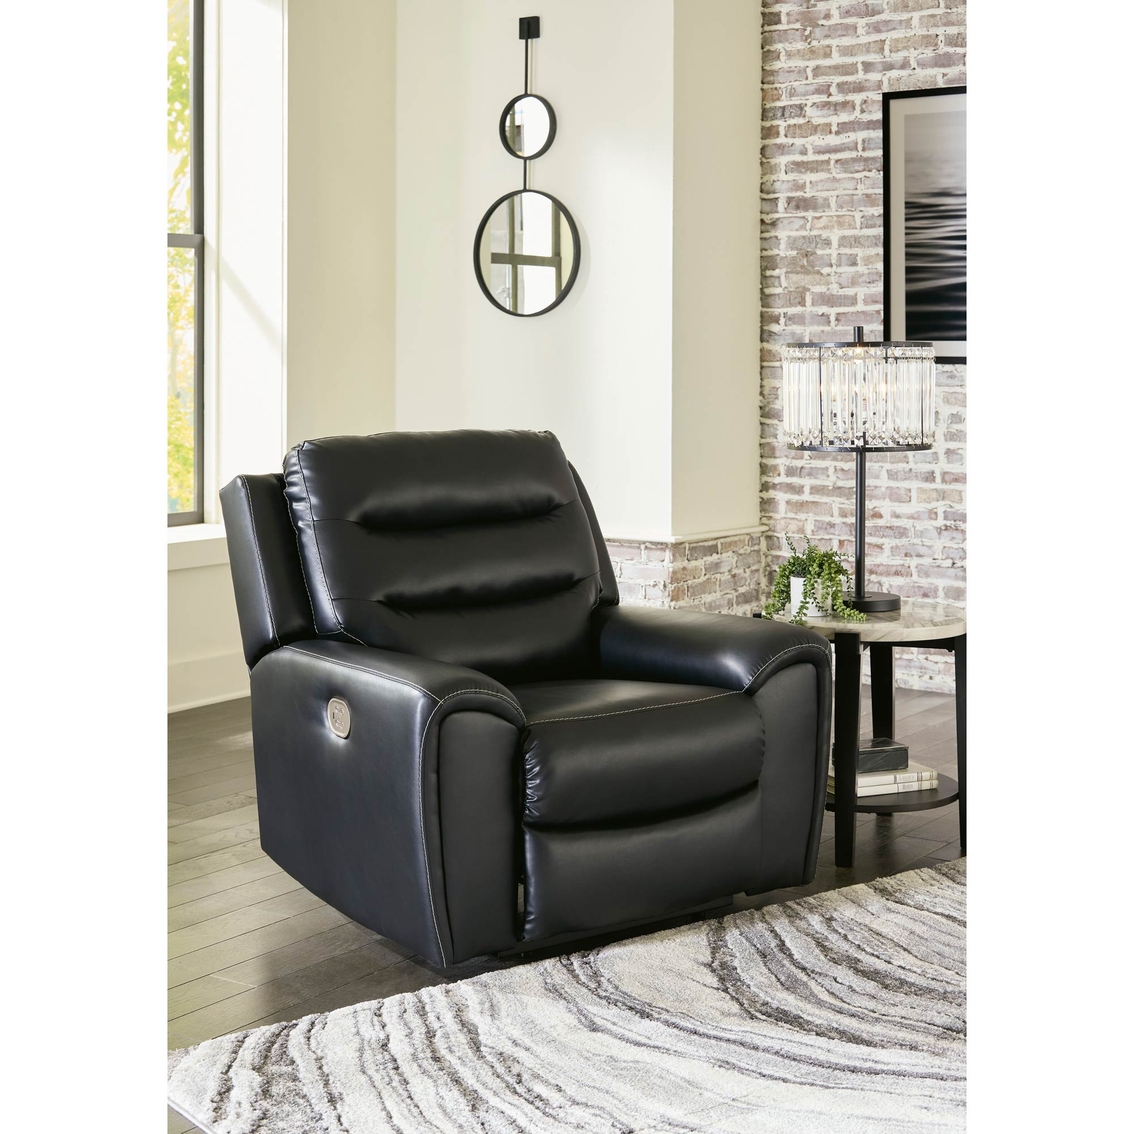 Signature Design by Ashley Warlin 3 pc. Power Reclining Set - Image 4 of 7